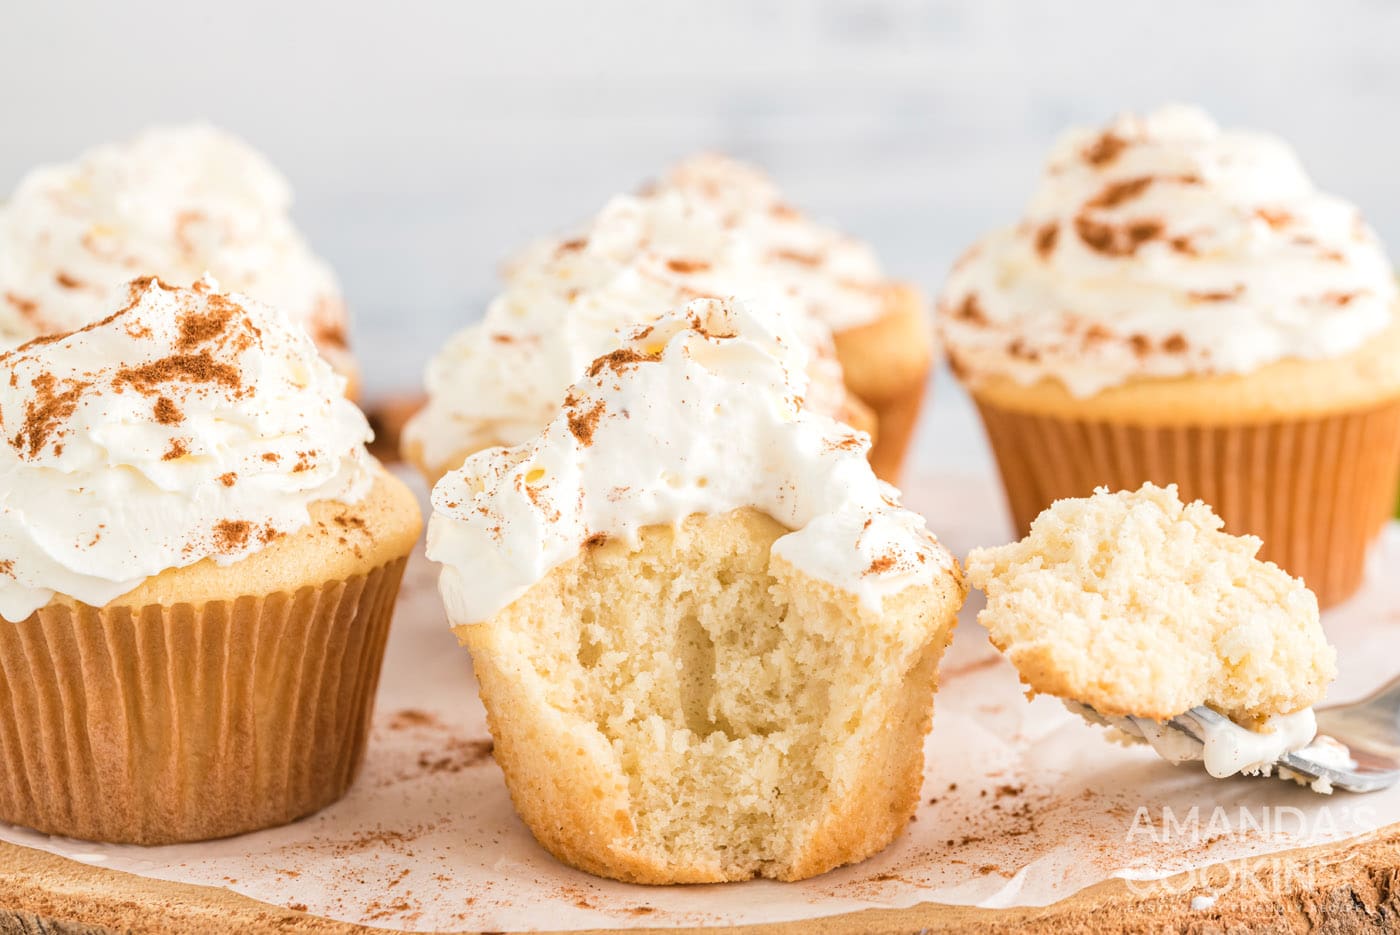 Make a batch of easy apple pie cupcakes in under 30 minutes using pantry staple ingredients!